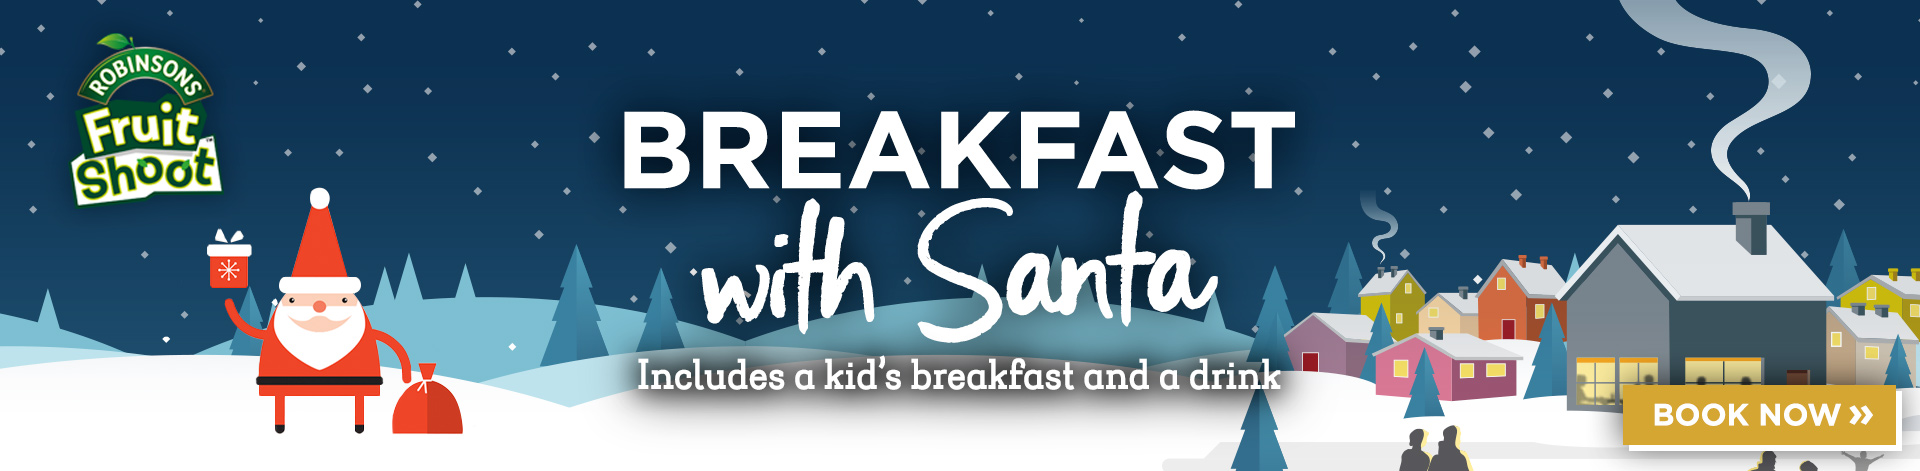 Breakfast with Santa menu at The Town House